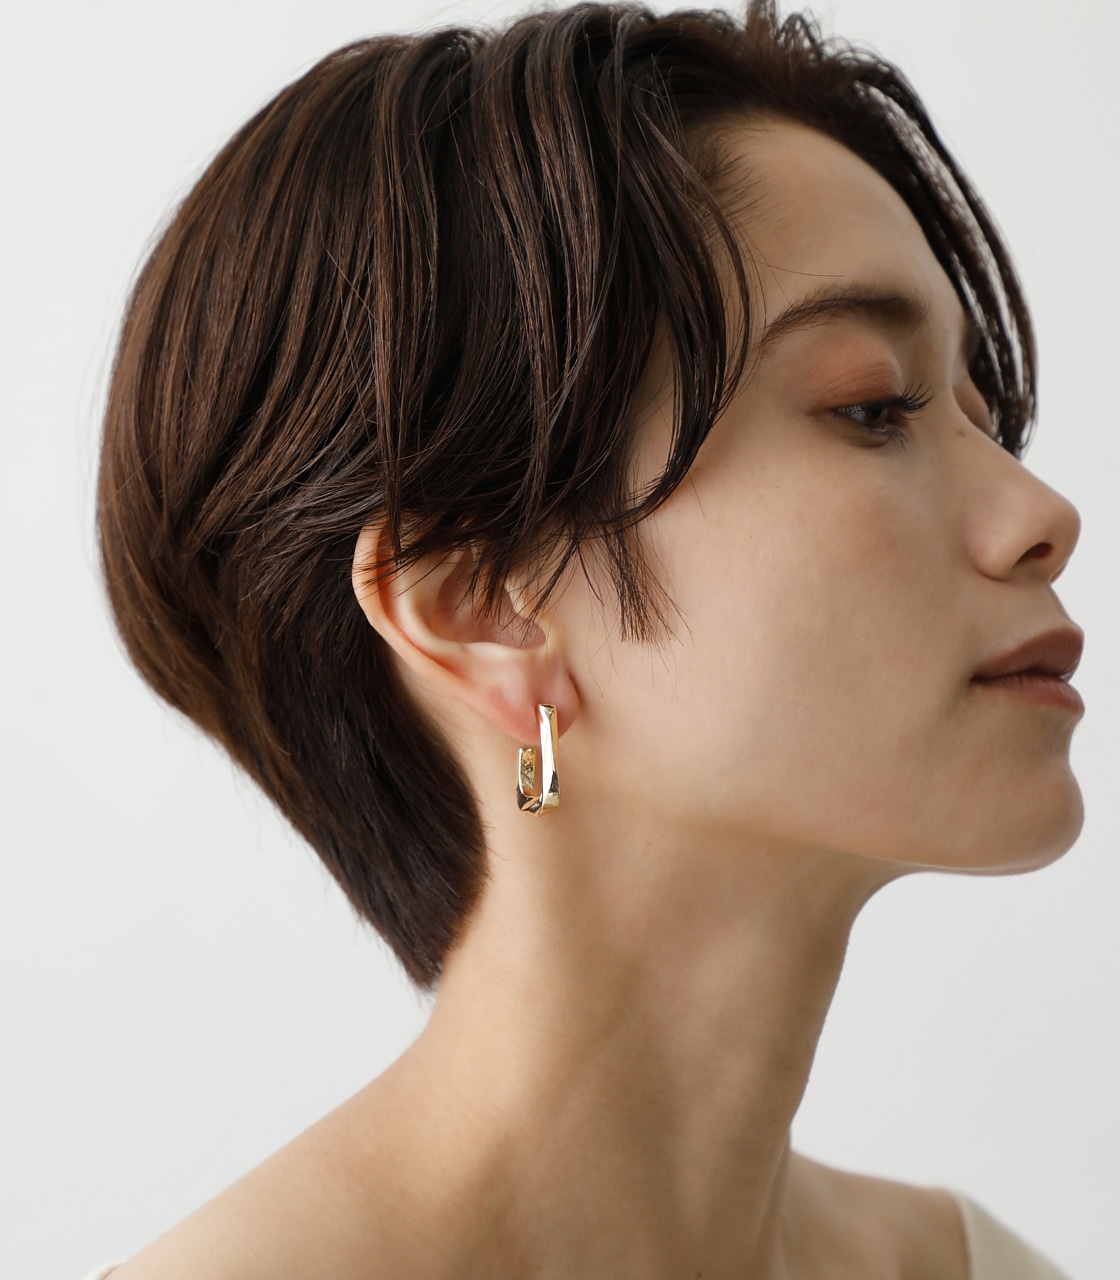 SQUARE METAL EARRINGS/スクエアメタルピアス 詳細画像 L/GLD 7